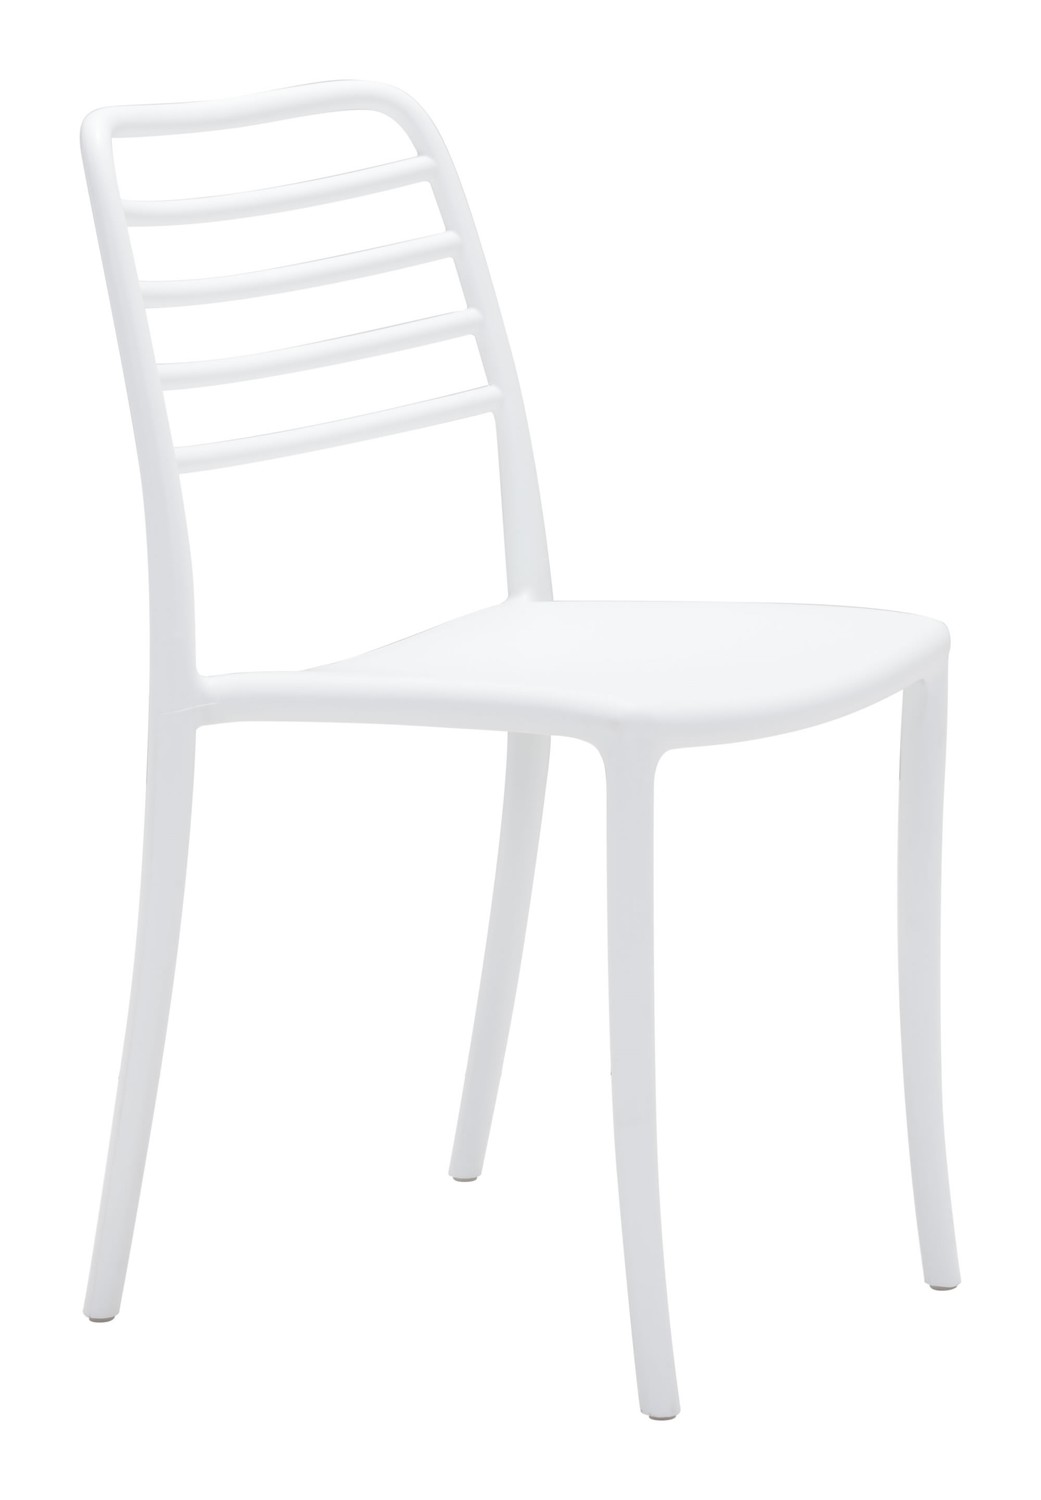 17.7" x 20.9" x 32.9" White Plastic Dining Chair Set of 2